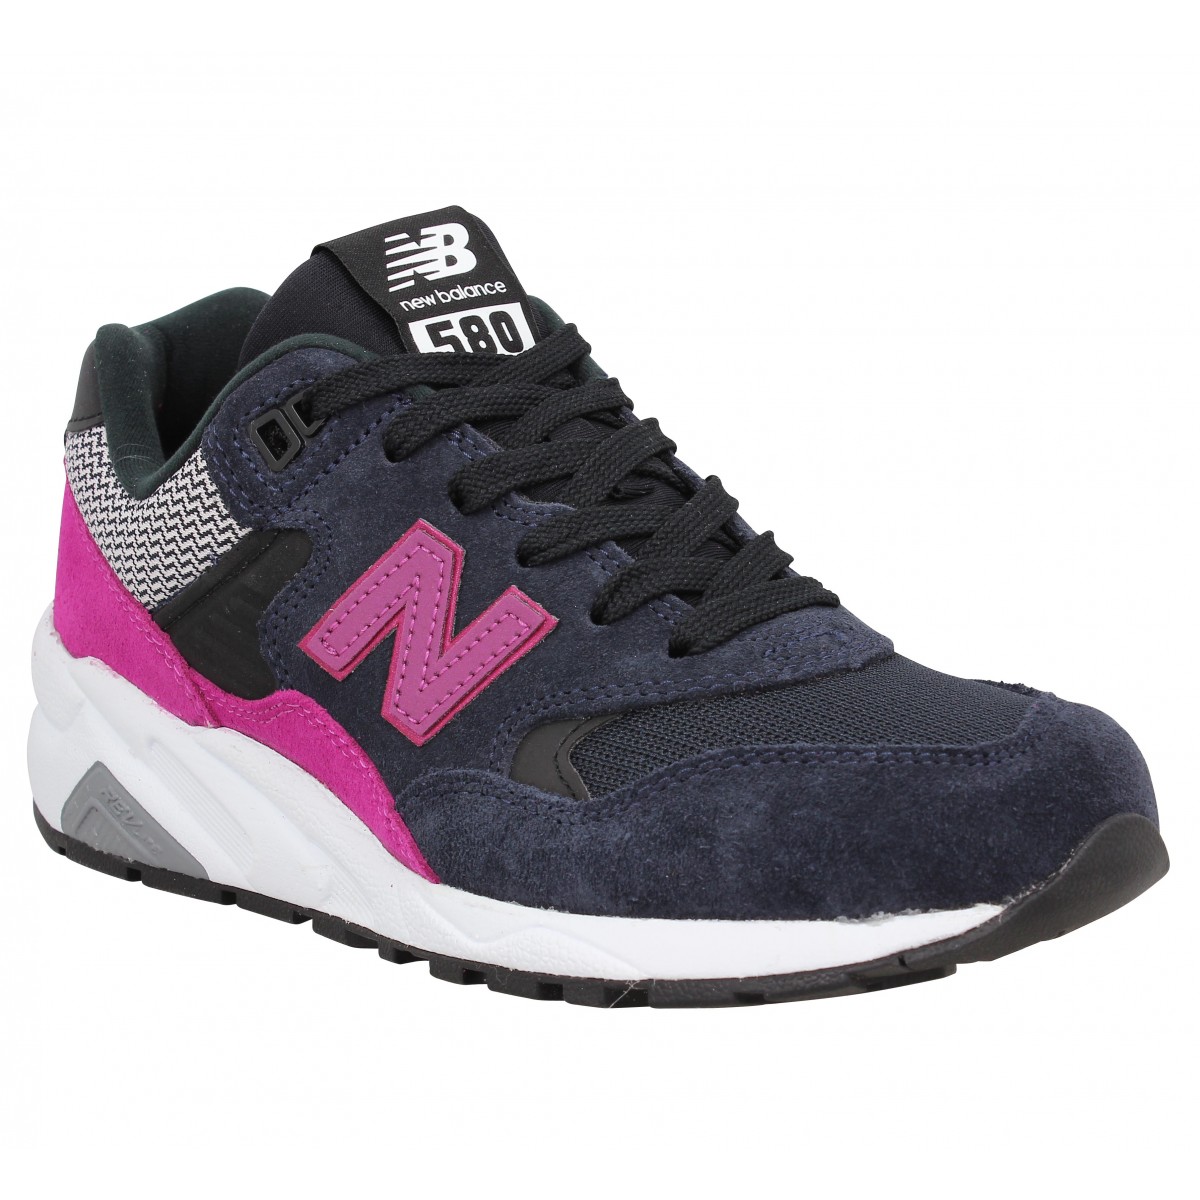 New balance 580 violet femme | Fanny chaussures